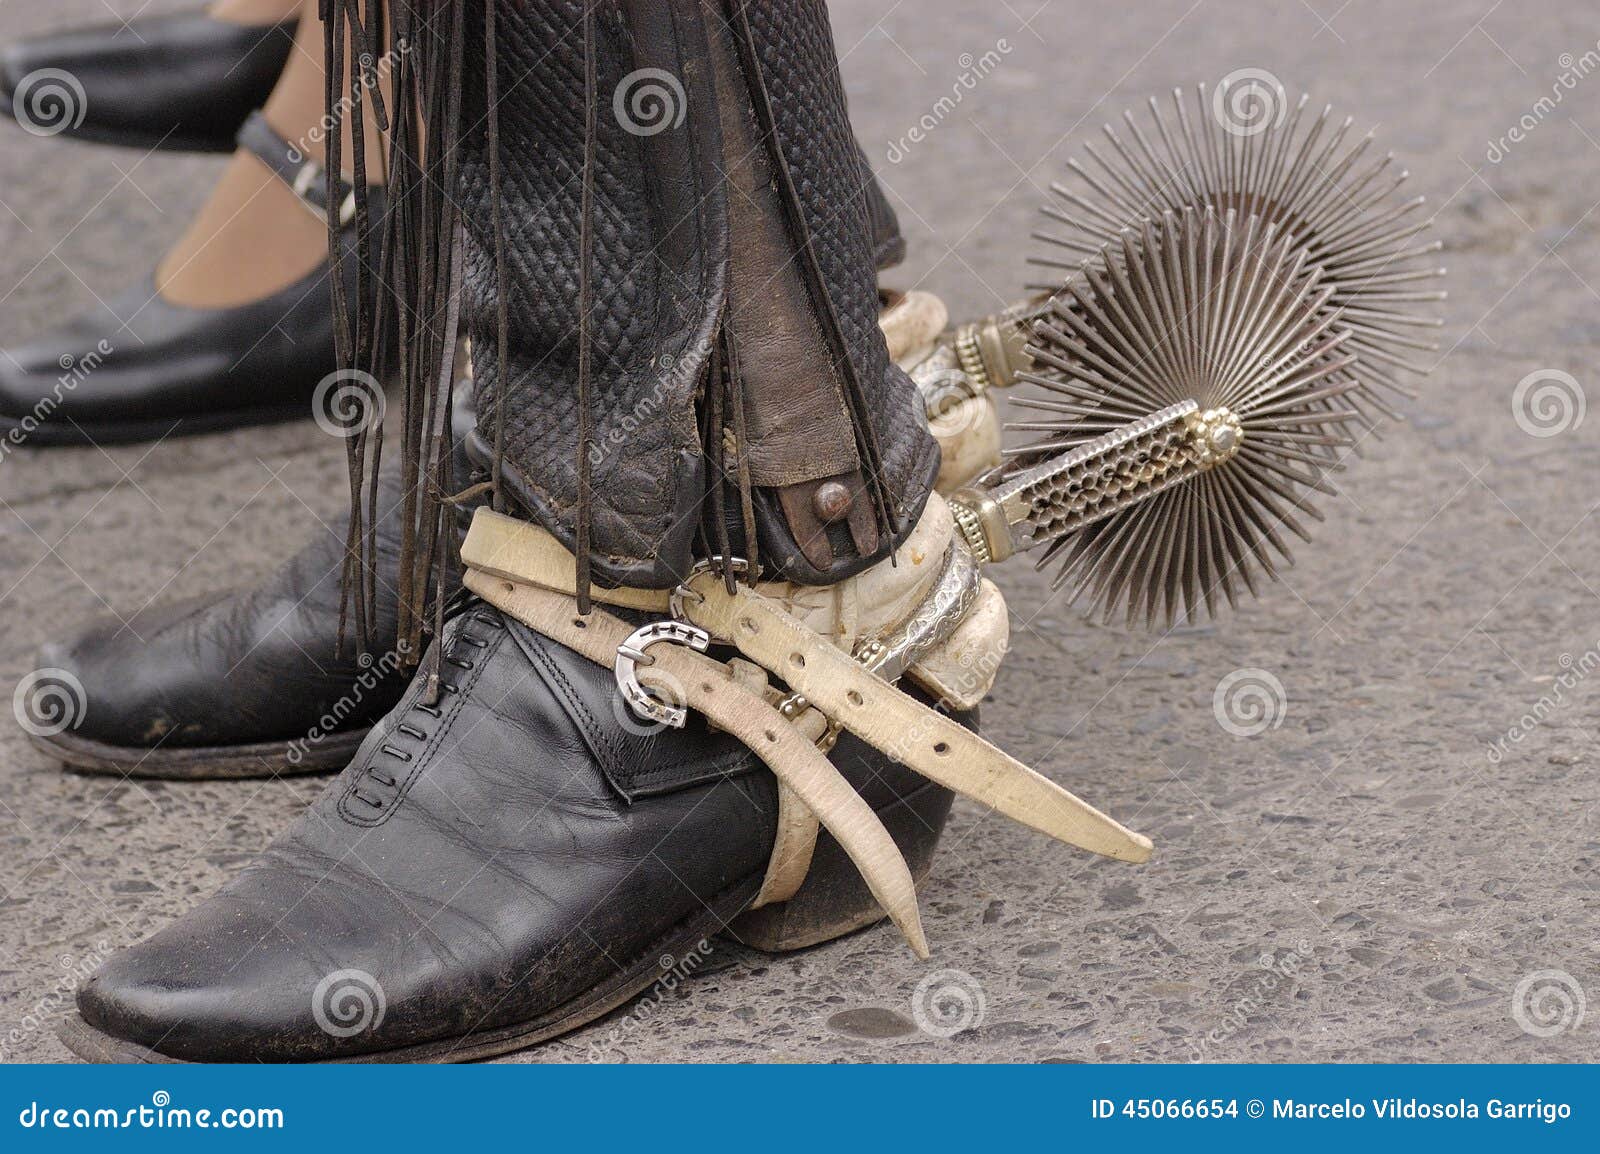 Shoes huaso stock photo. Image of tradition, silver, spurs - 45066654